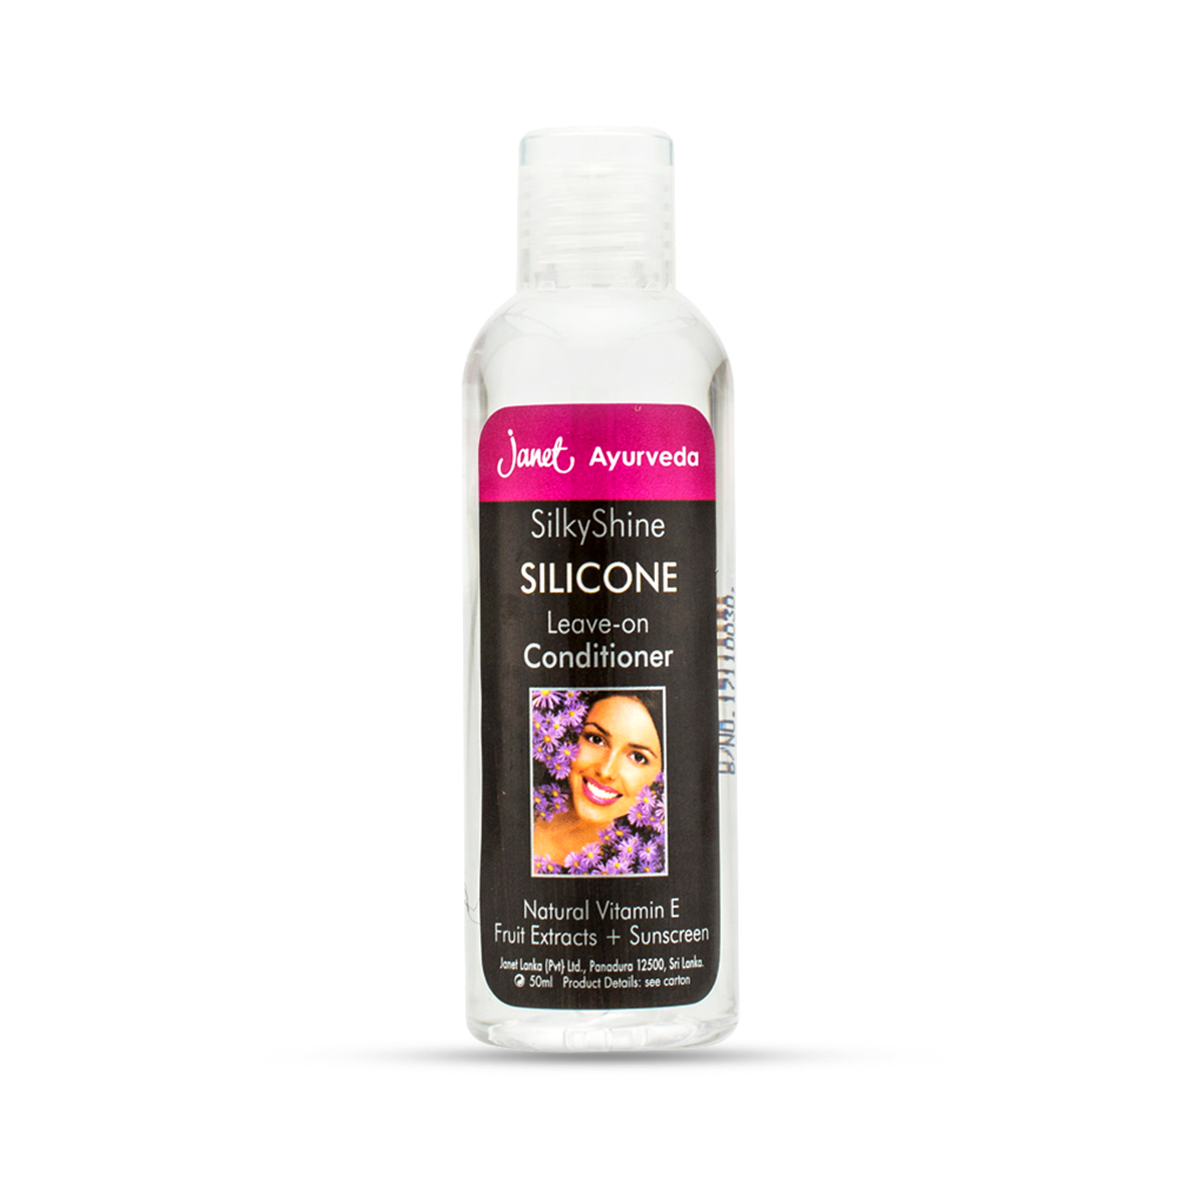 Janet Silky Shine Silicone Leave-on Conditioner